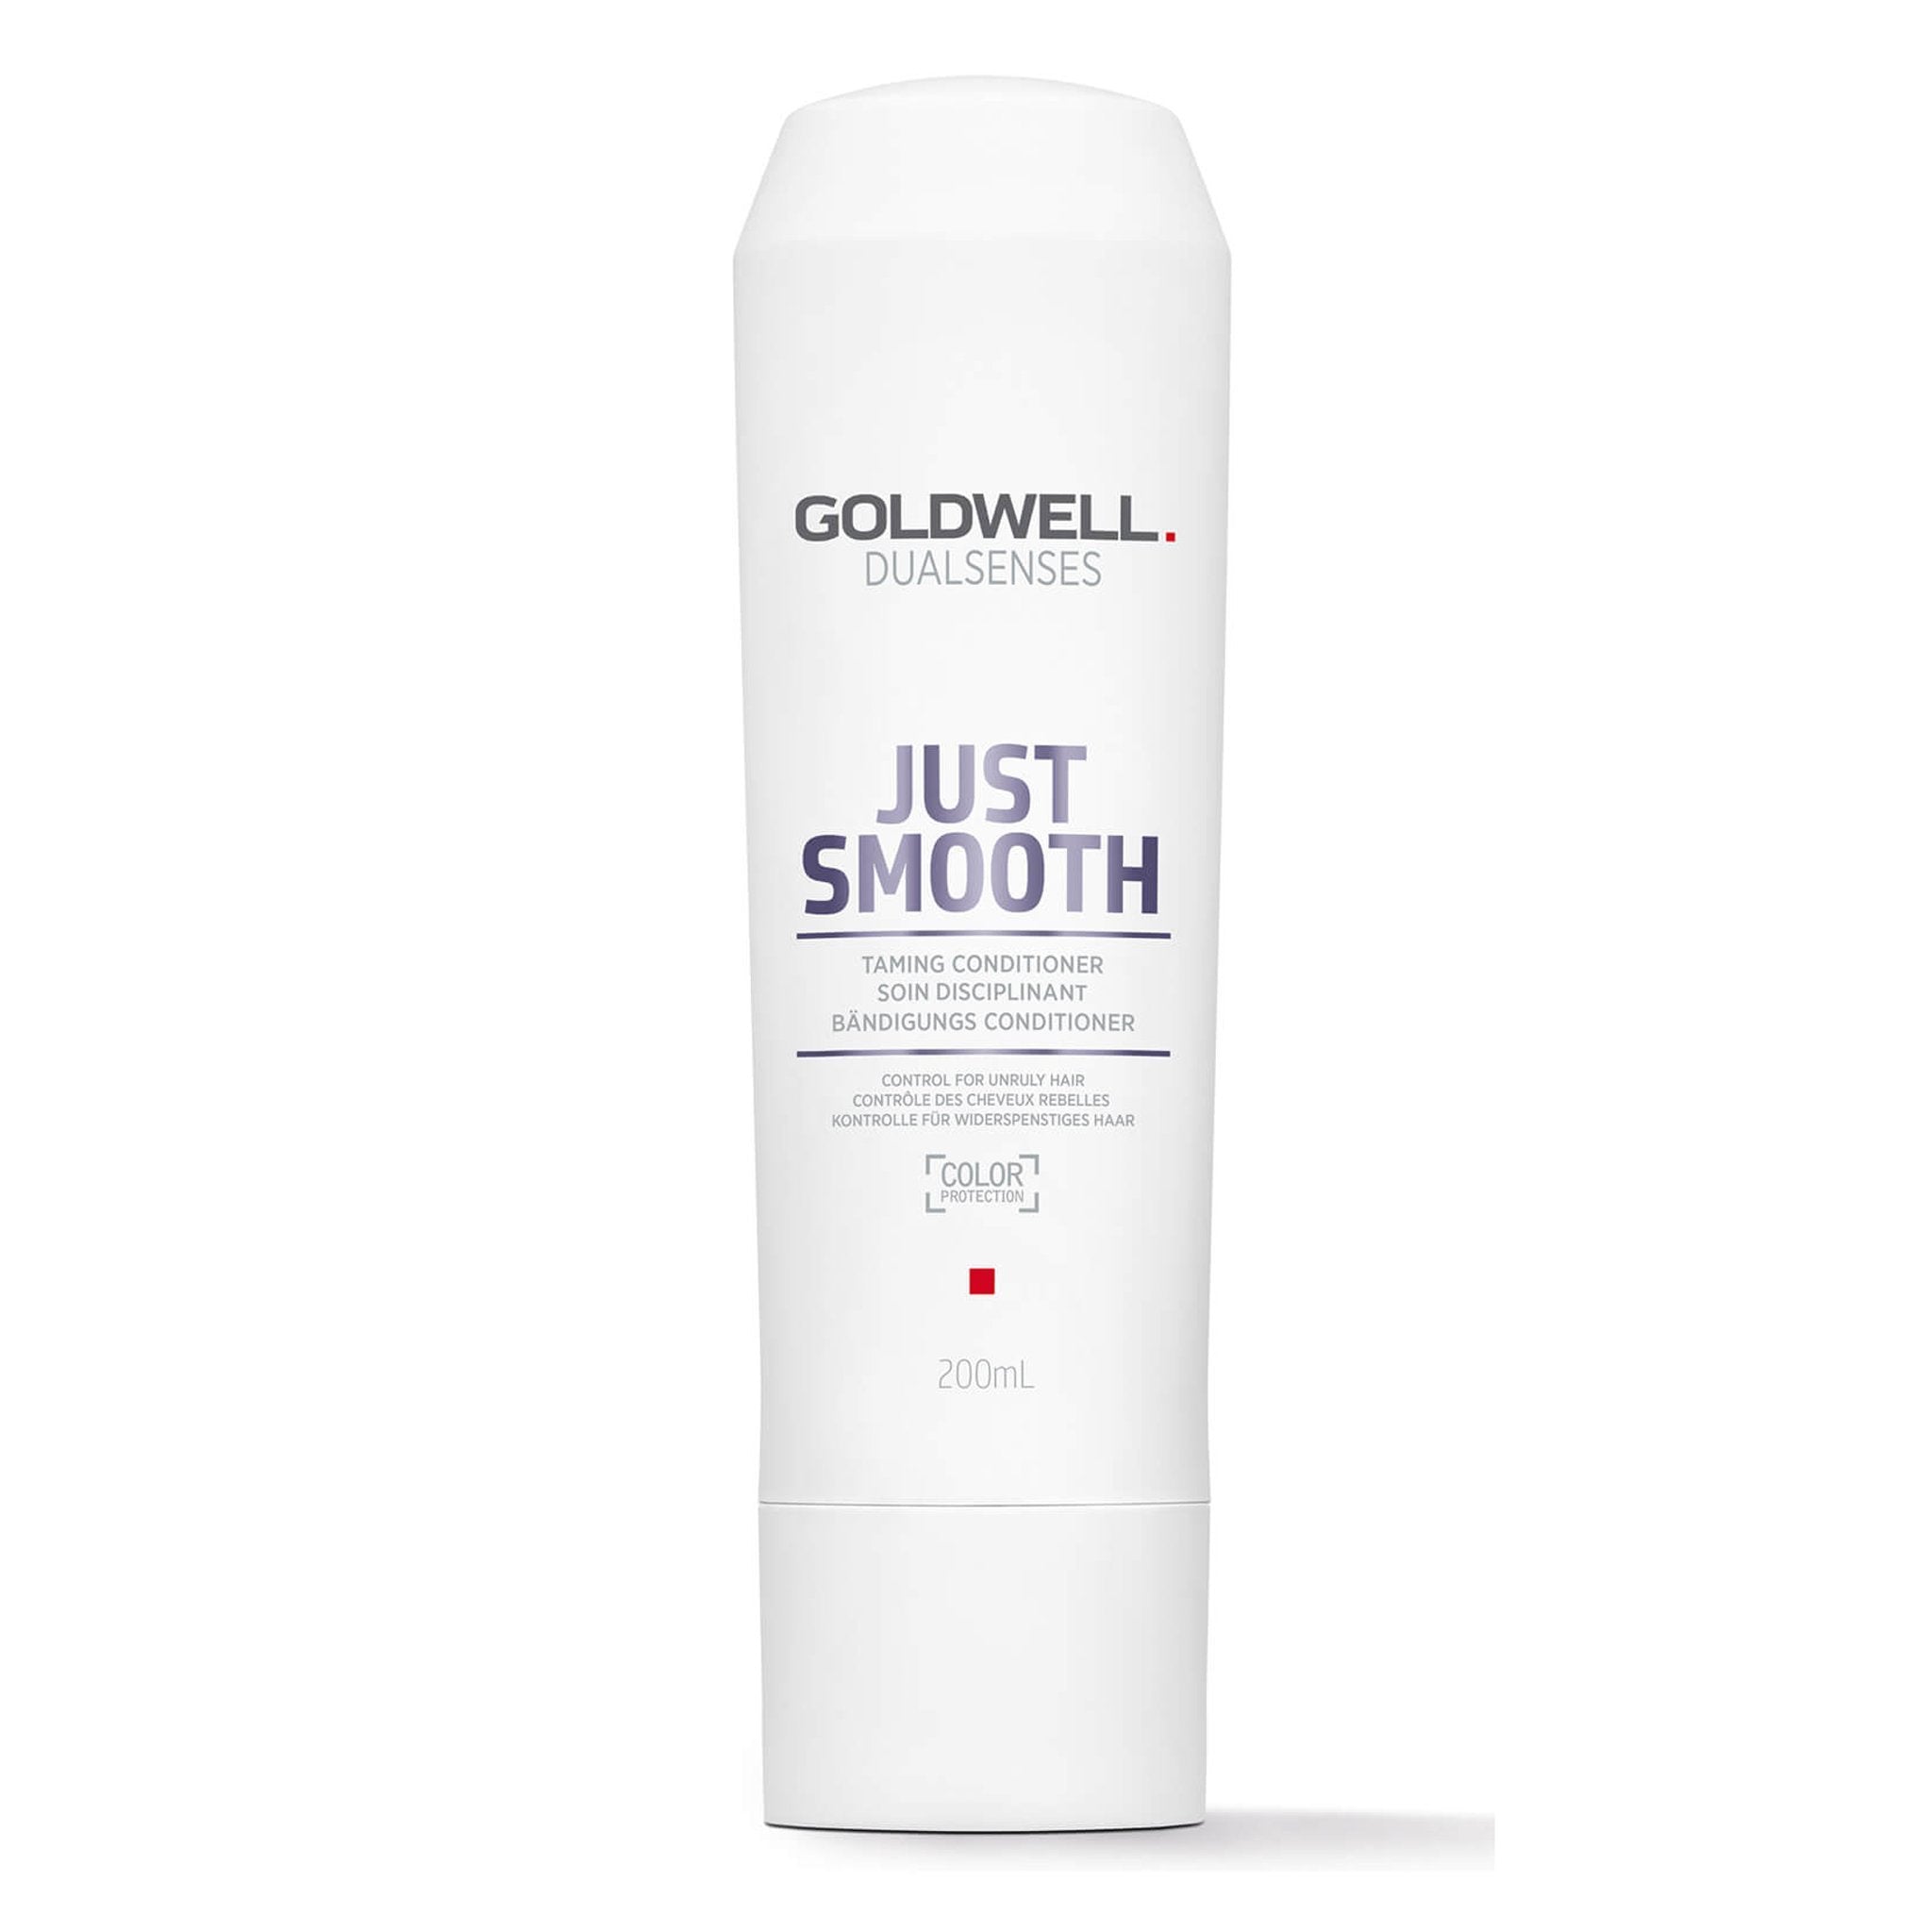 Goldwell. Just Smooth Revitalisant Apprivoisant - 300ml - Concept C. Shop